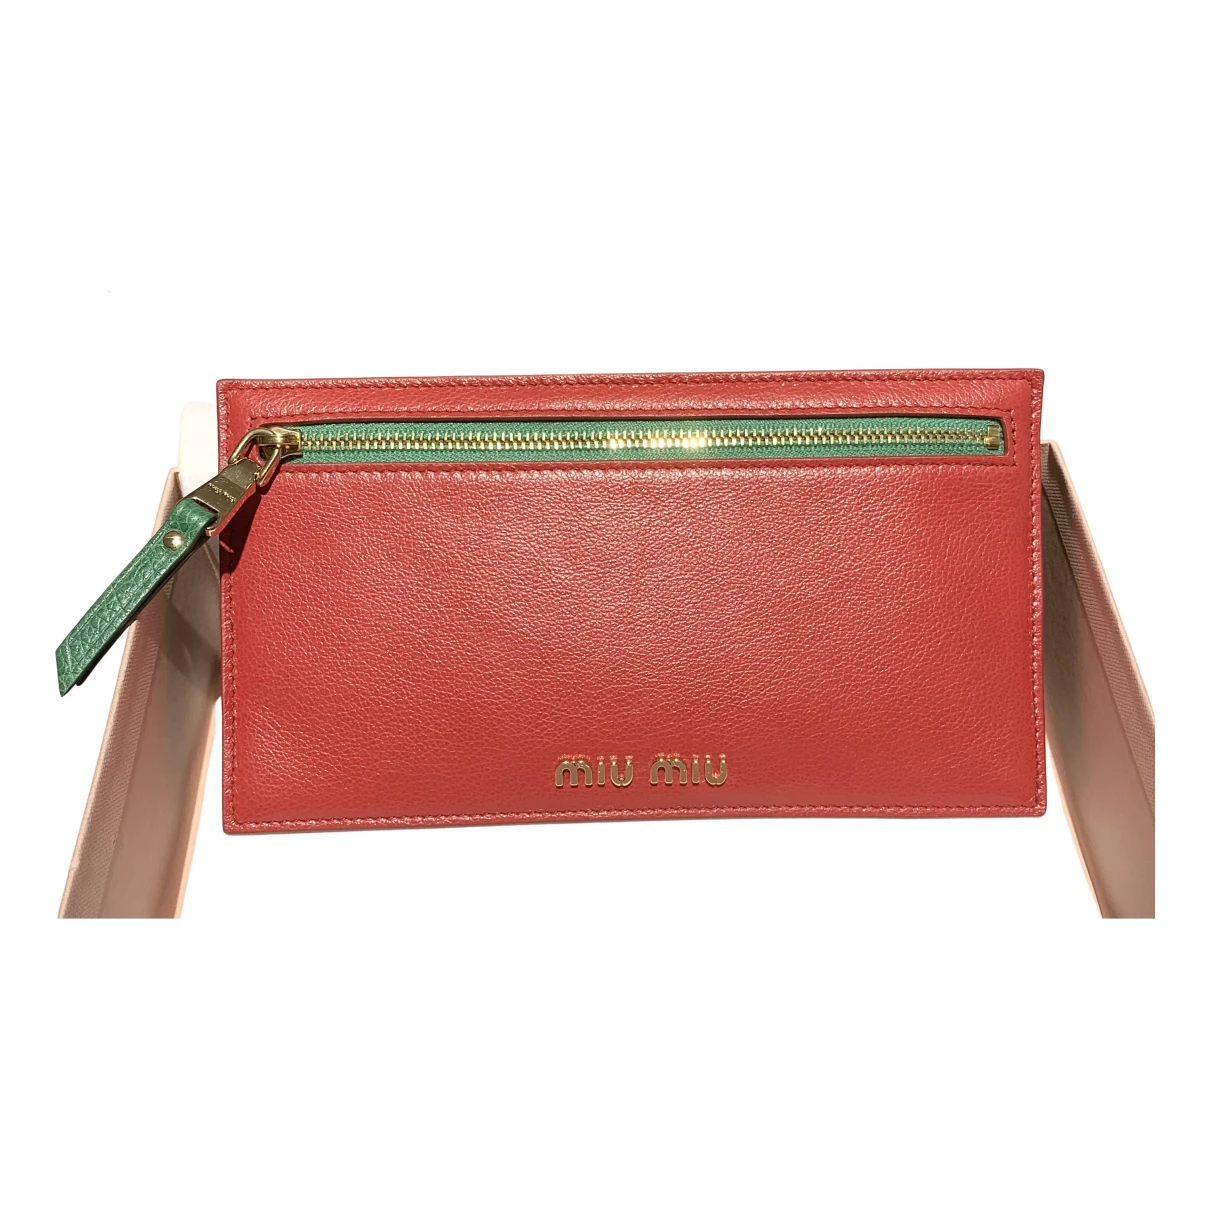 bags Miu Miu clutch bags for Female Leather. Used condition